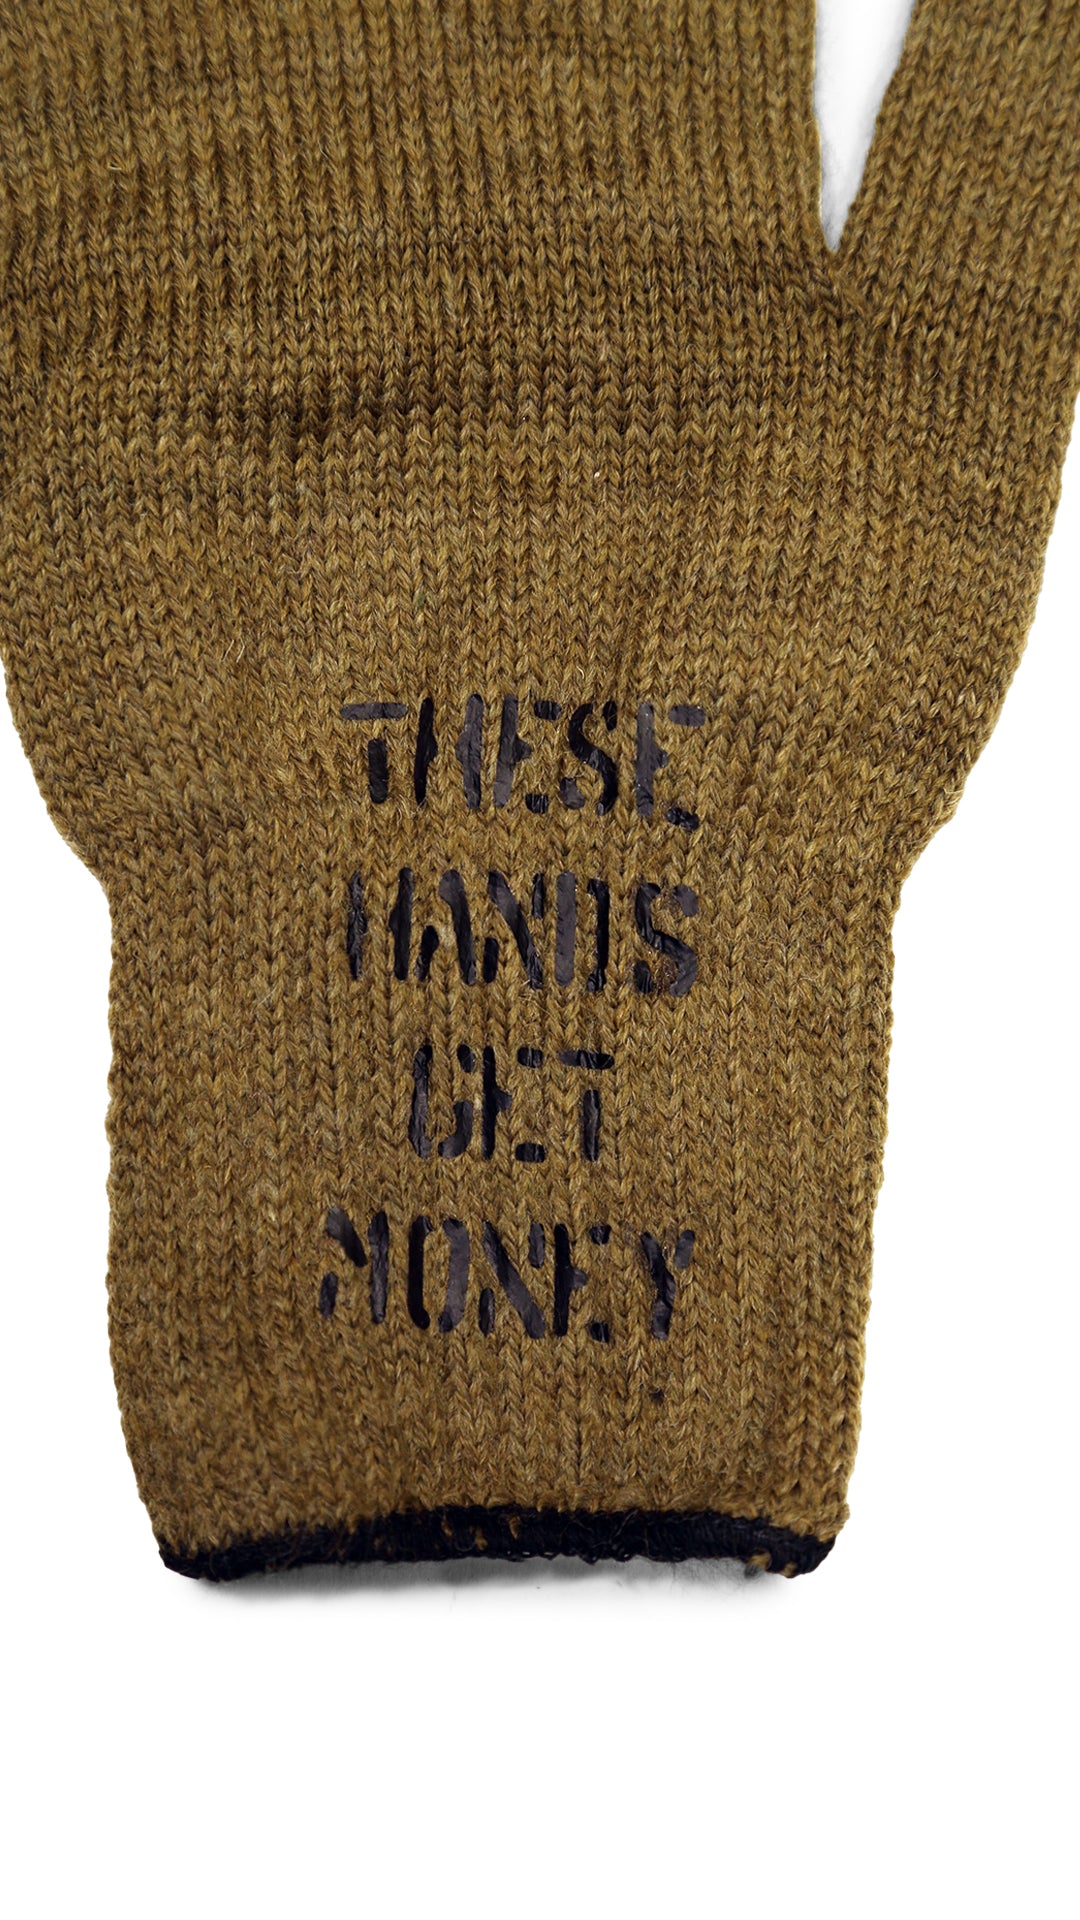 Parlor 23 "All Conditions Gear" Wool Gloves